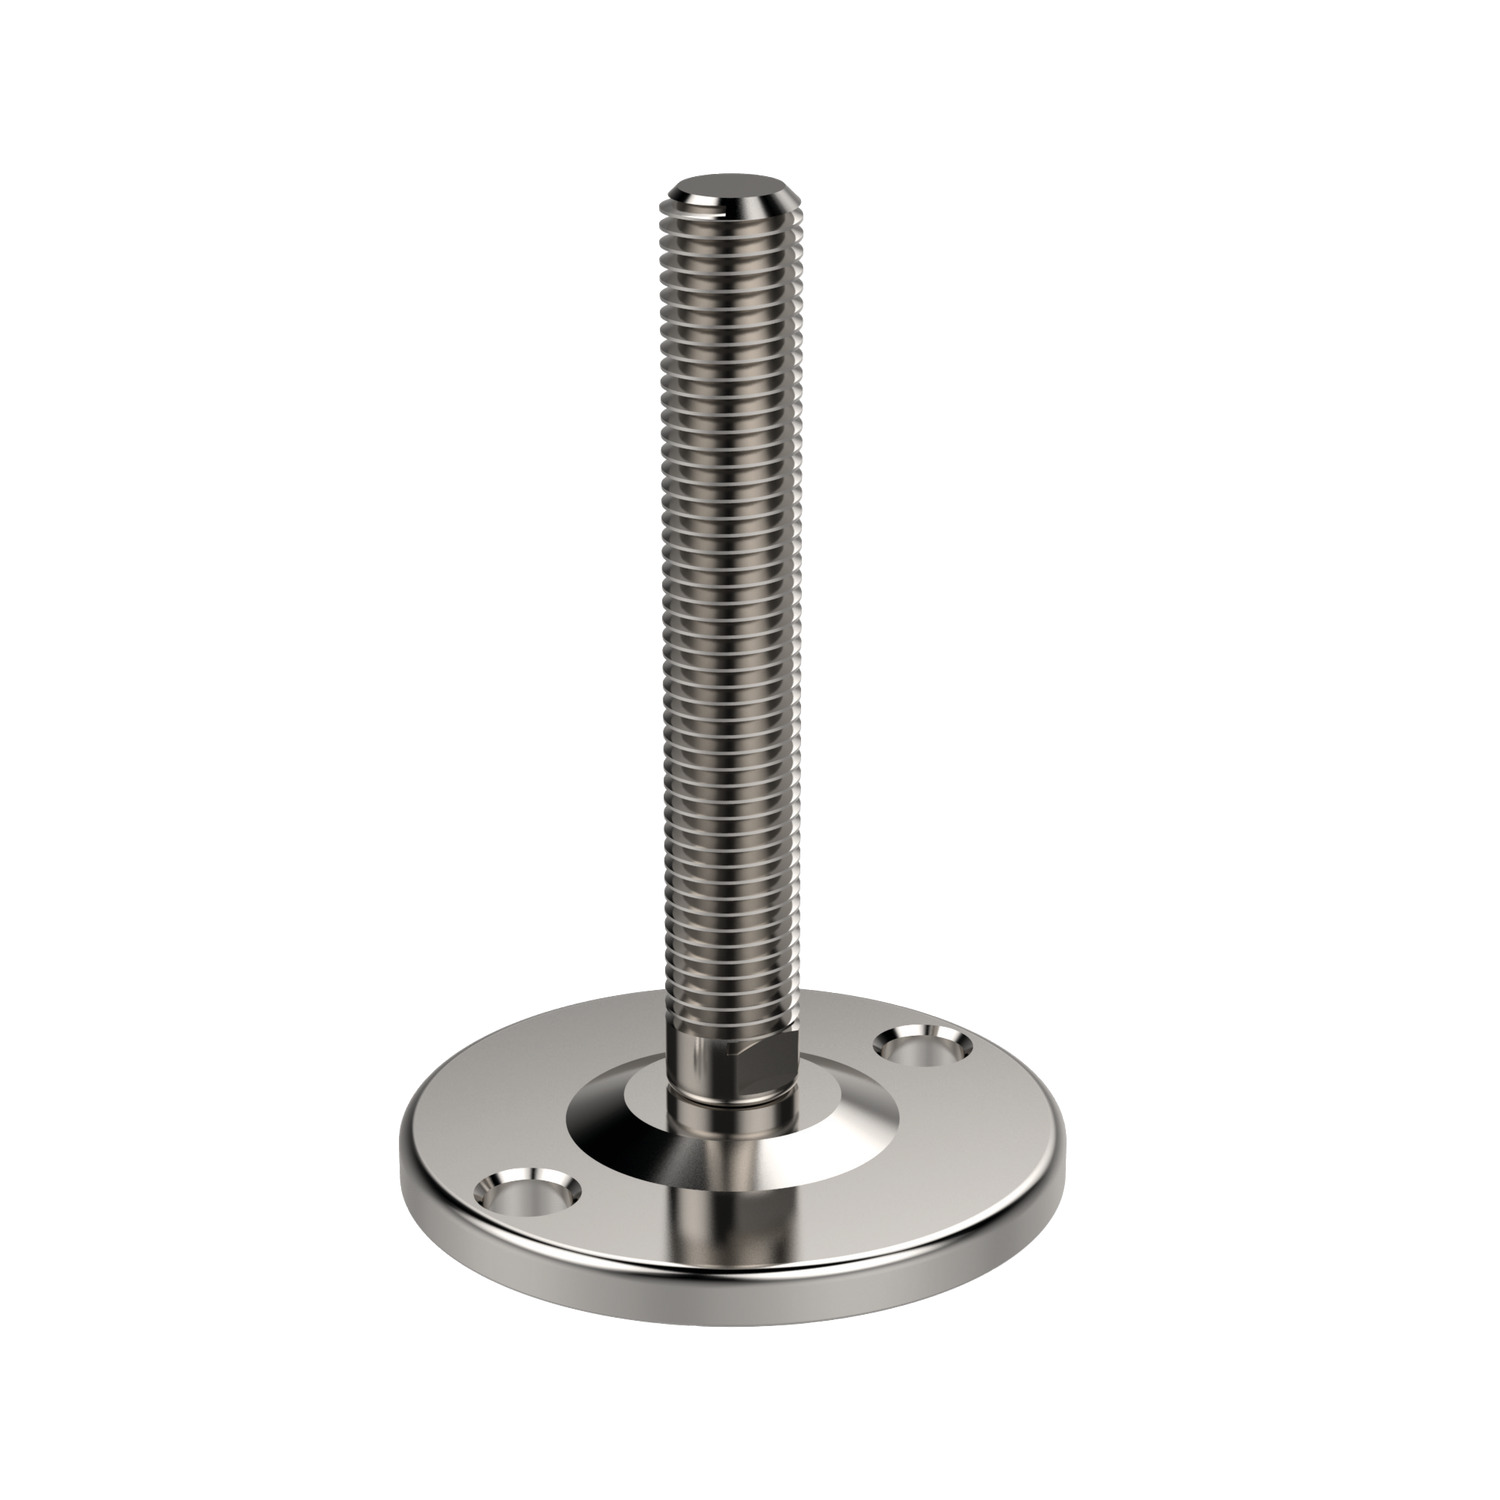 Levelling Feet - Bolt Down Stainless steel (AISI 304, AISI 316 on request) bolt down levelling feet for medium loads. Bolt allows for 5° articulation.